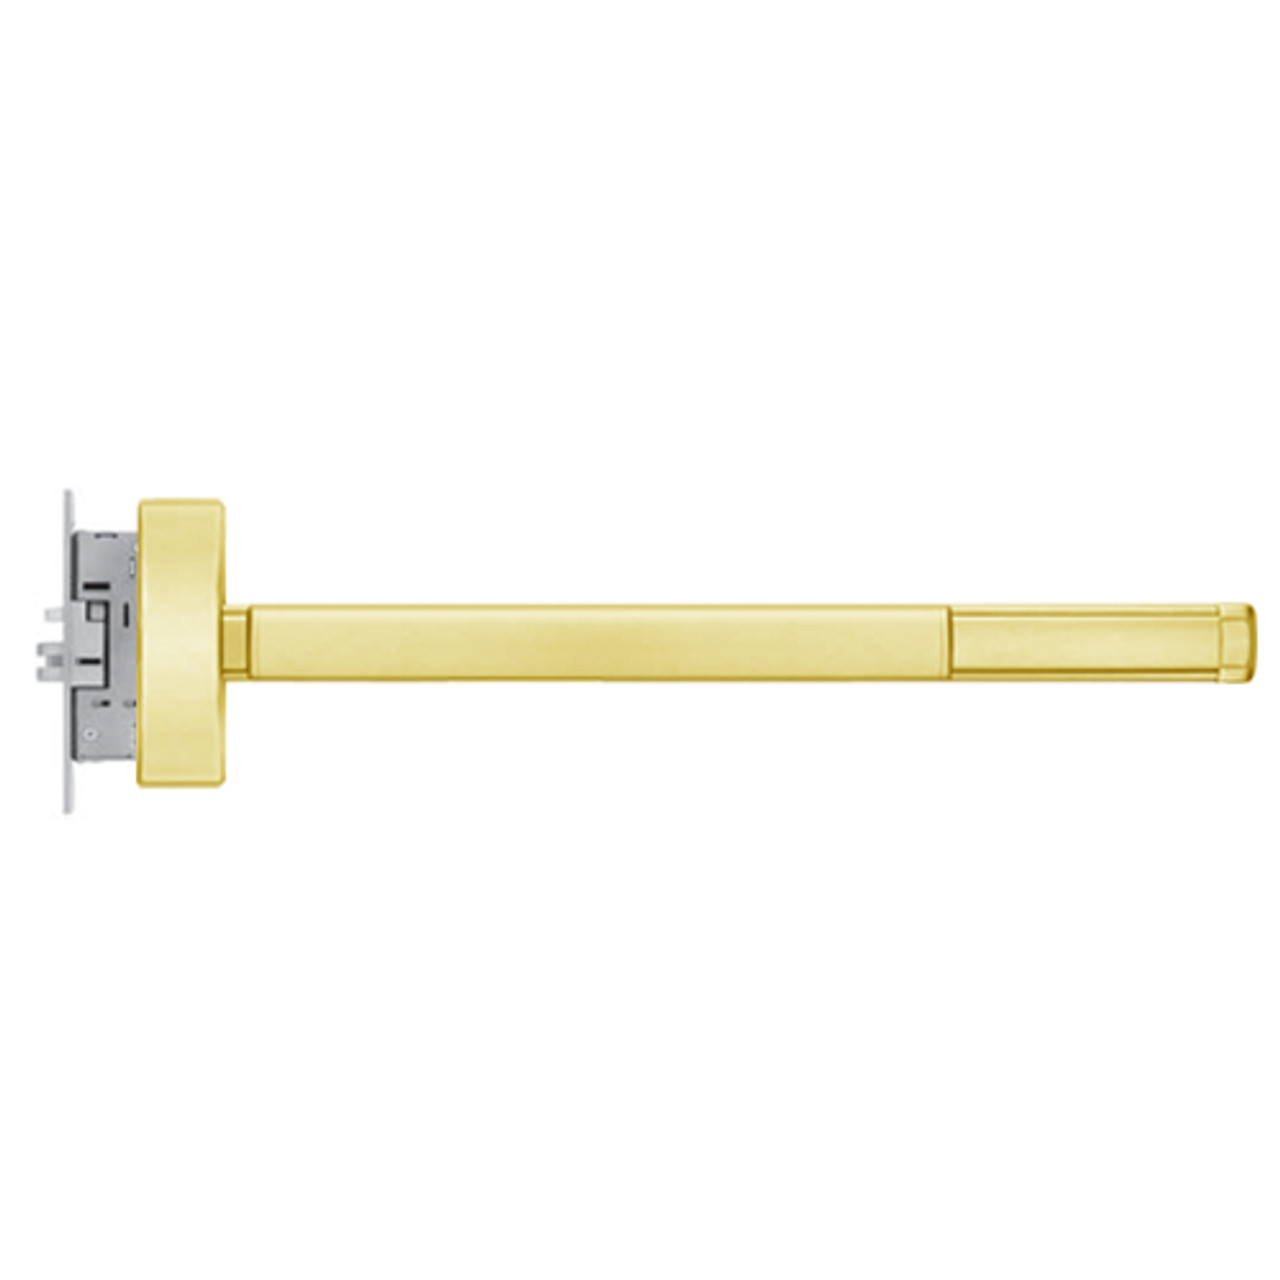 FL2308-LHR-605-36 PHI 2300 Series Fire Rated Apex Mortise Exit Device Prepped for Key Controls Lever/Knob in Bright Brass Finish